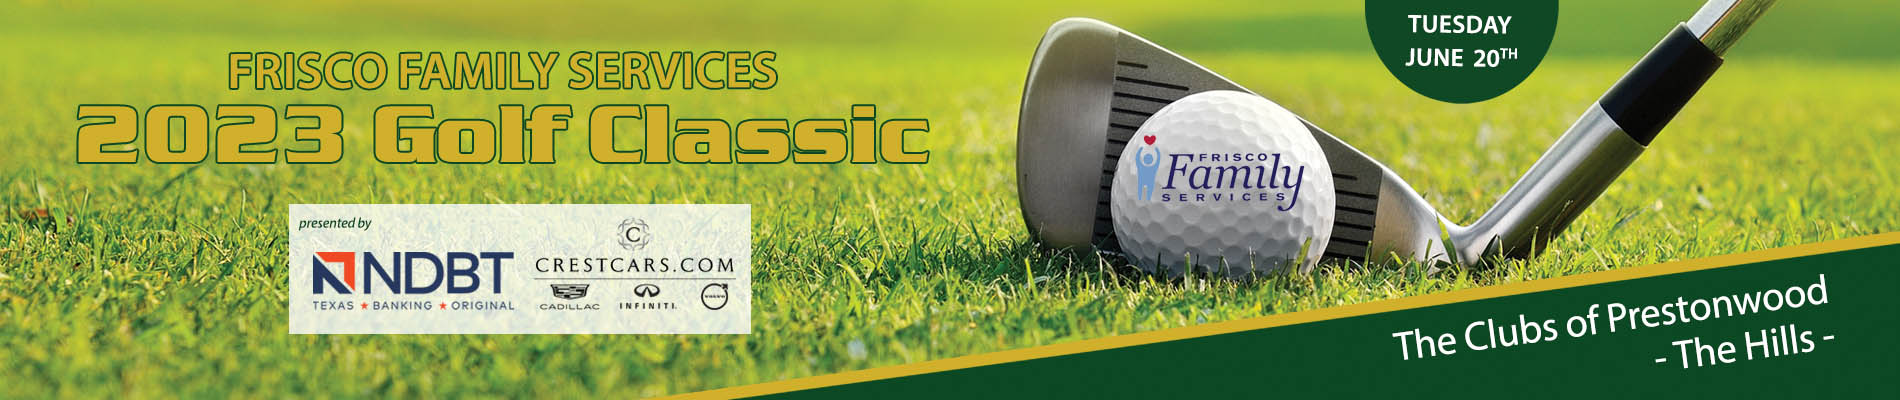 2023 Frisco Family Services Golf Classic page header